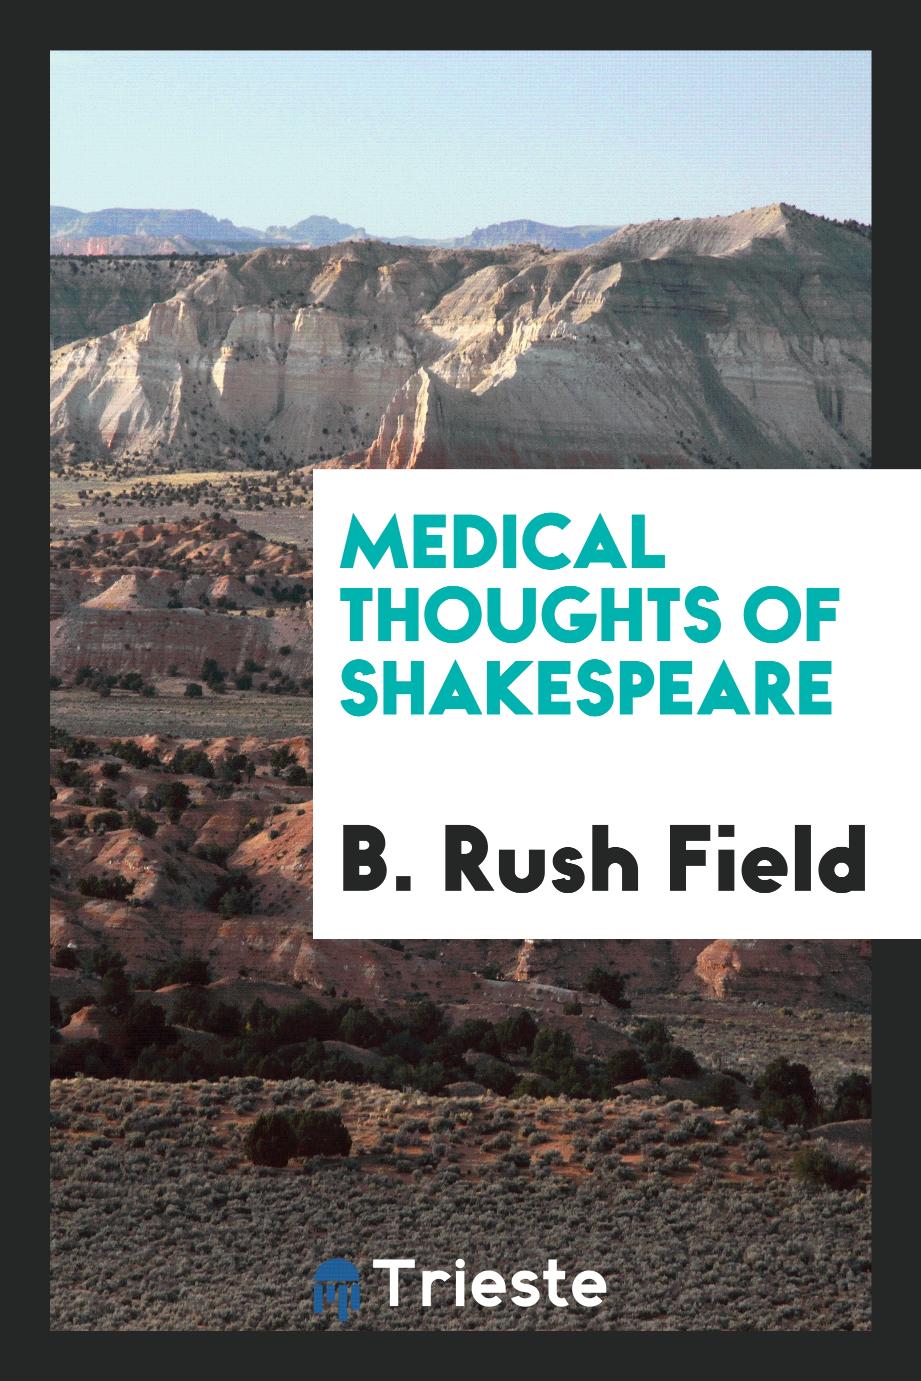 Medical thoughts of Shakespeare